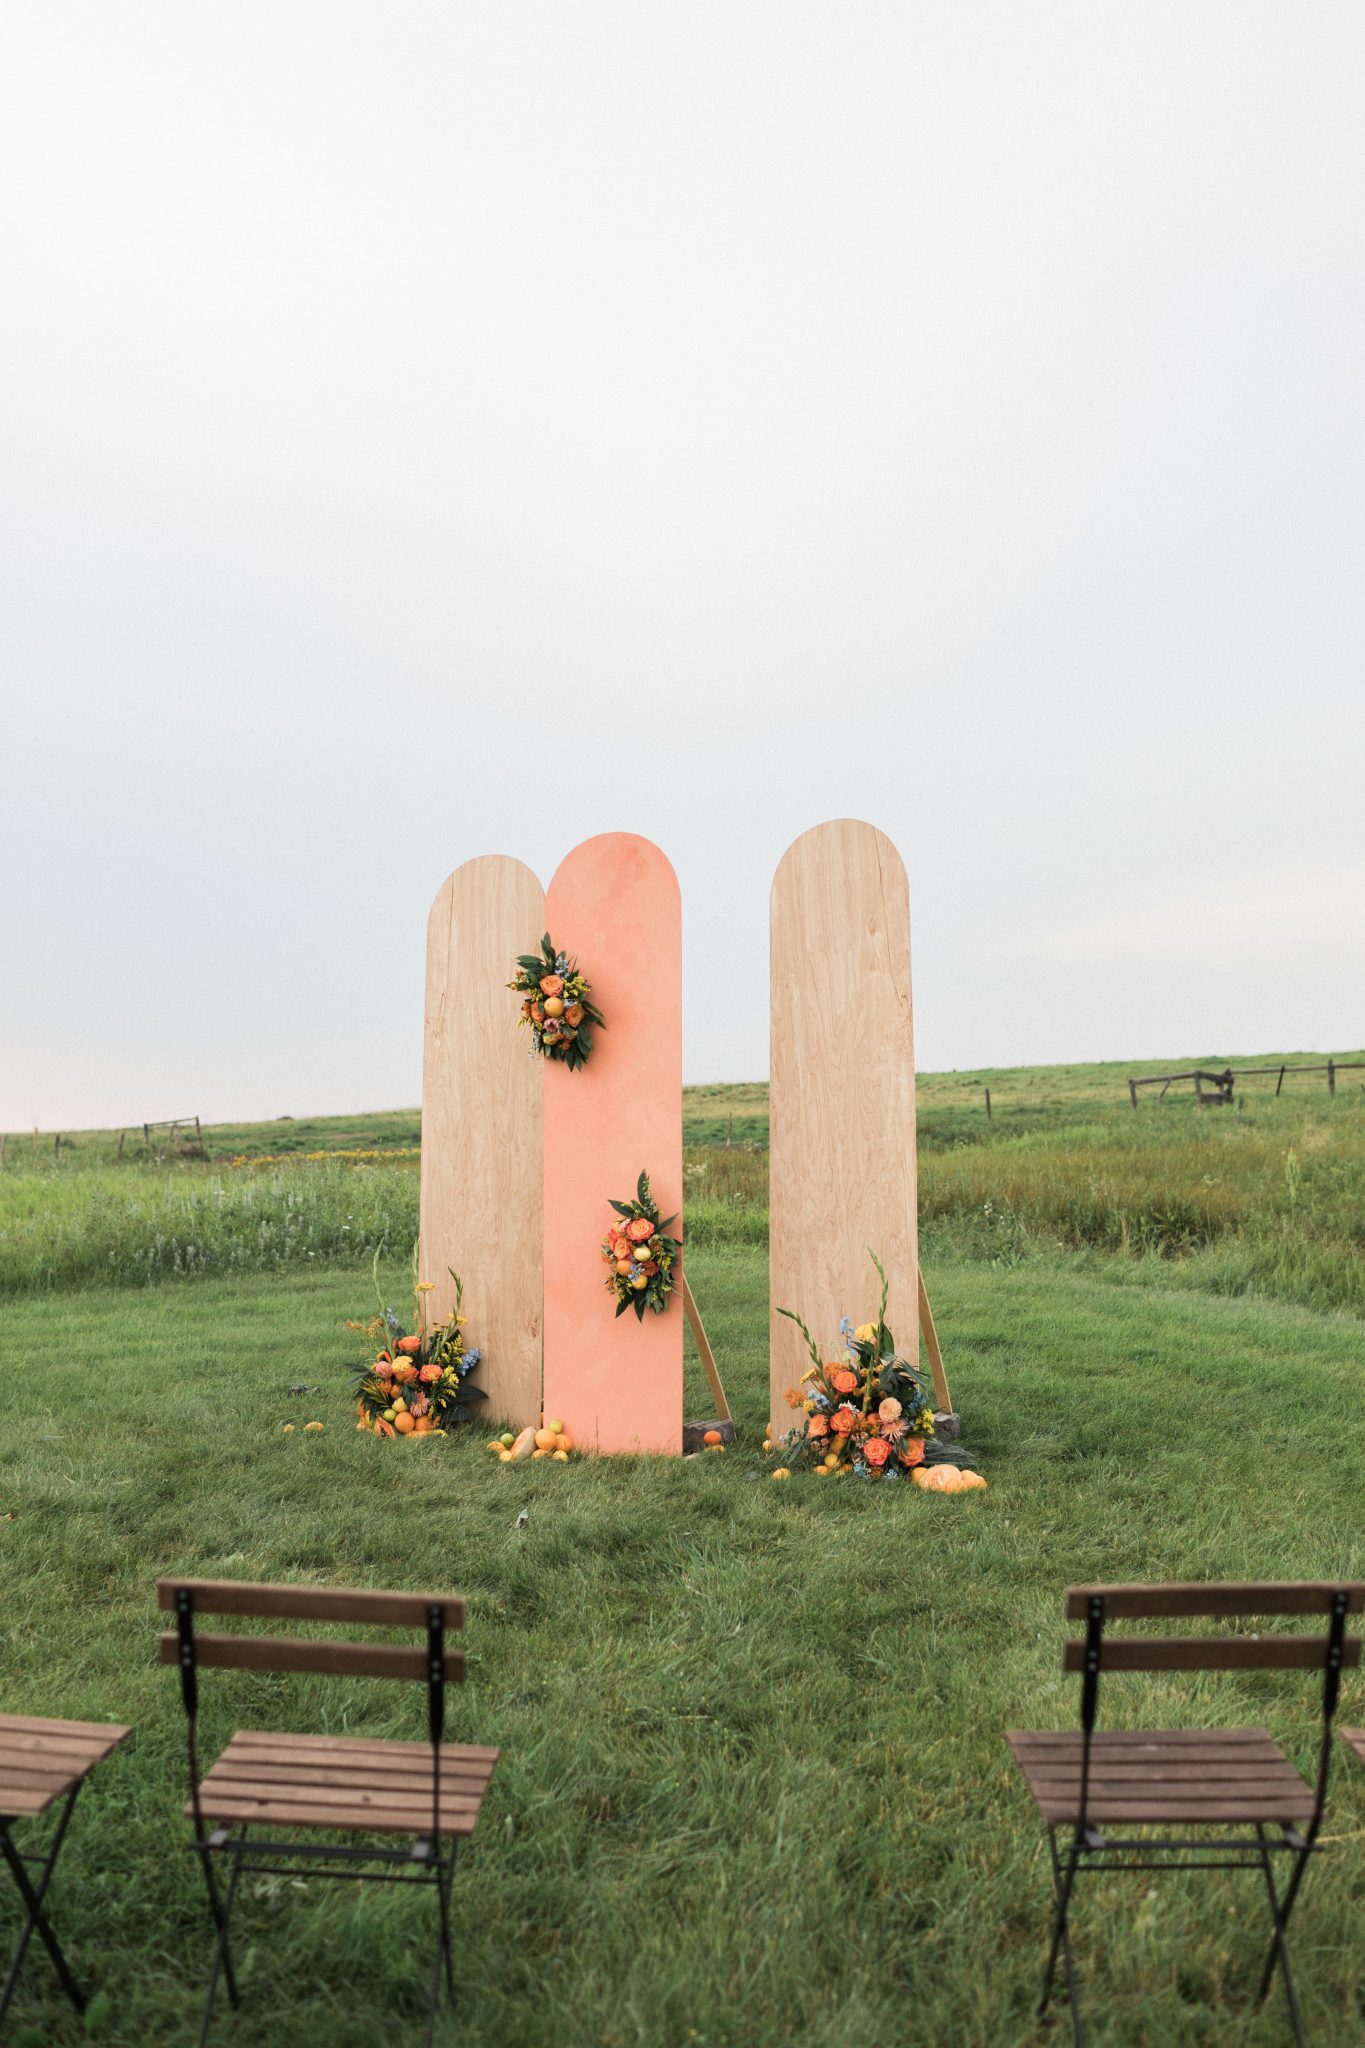 Ceremony backdrop panels for this garden inspired wedding at The Gathered